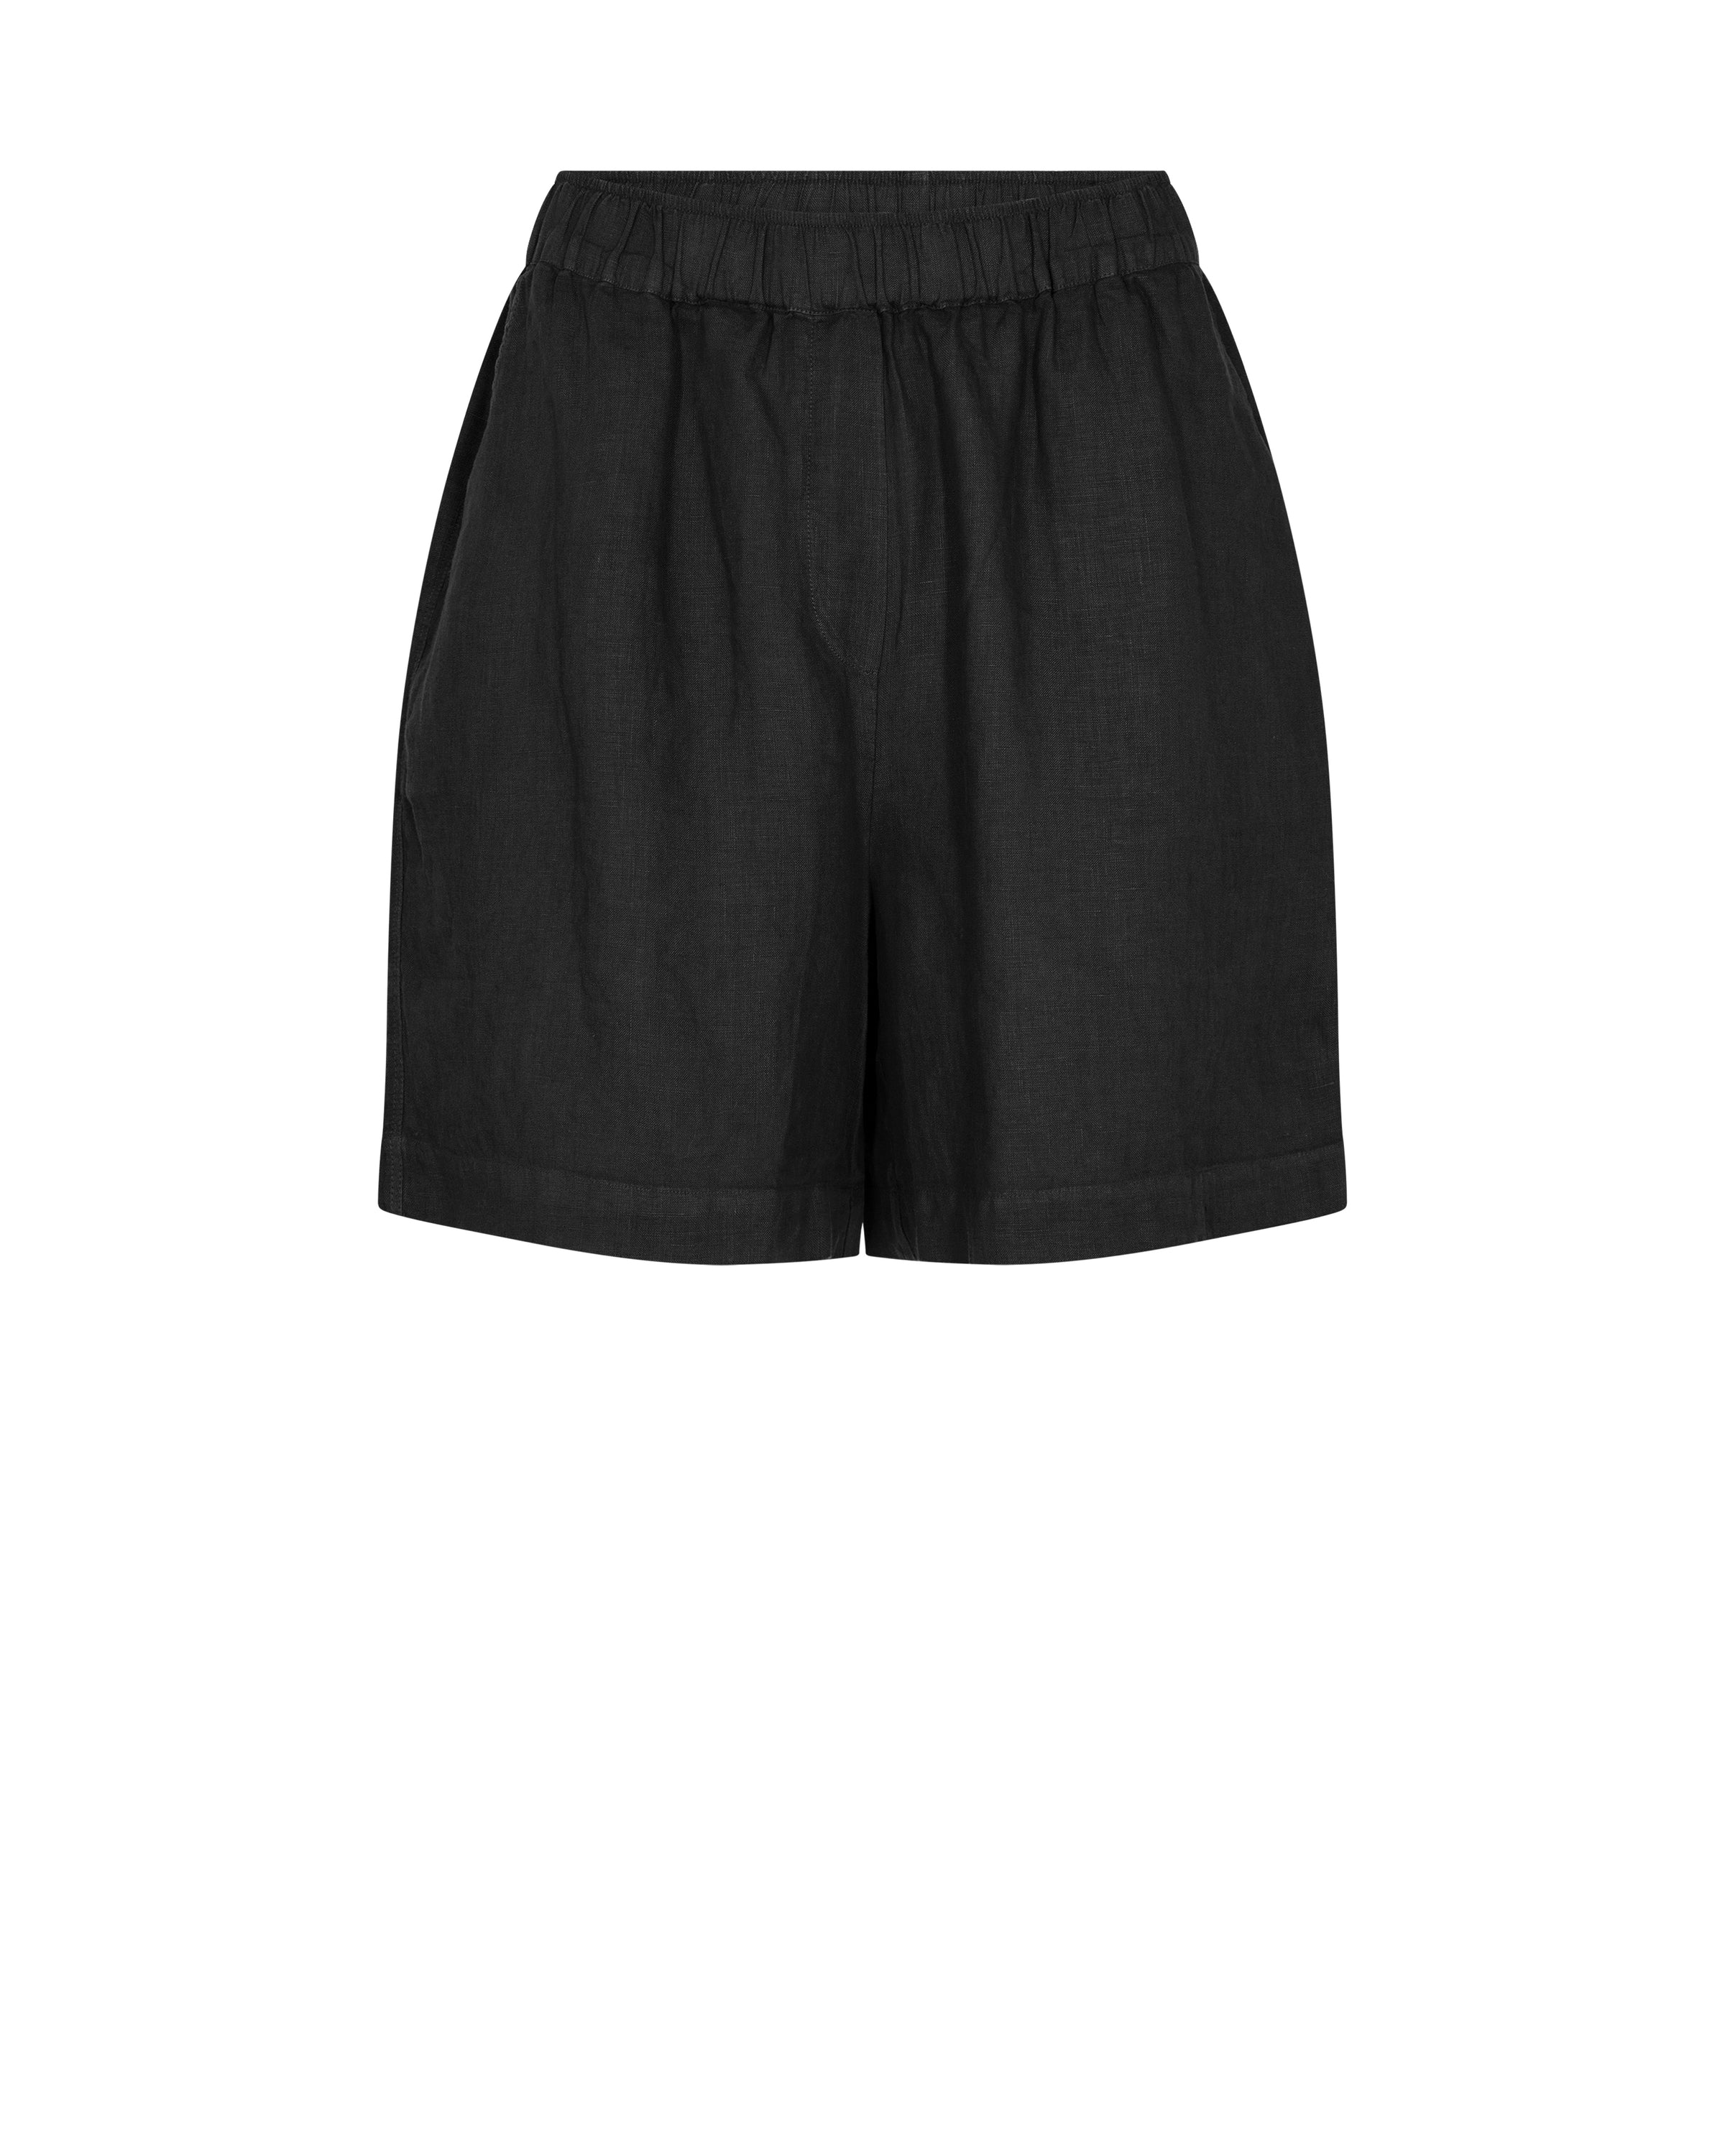 Black linen shorts with elasticated waistband and side seam pockets